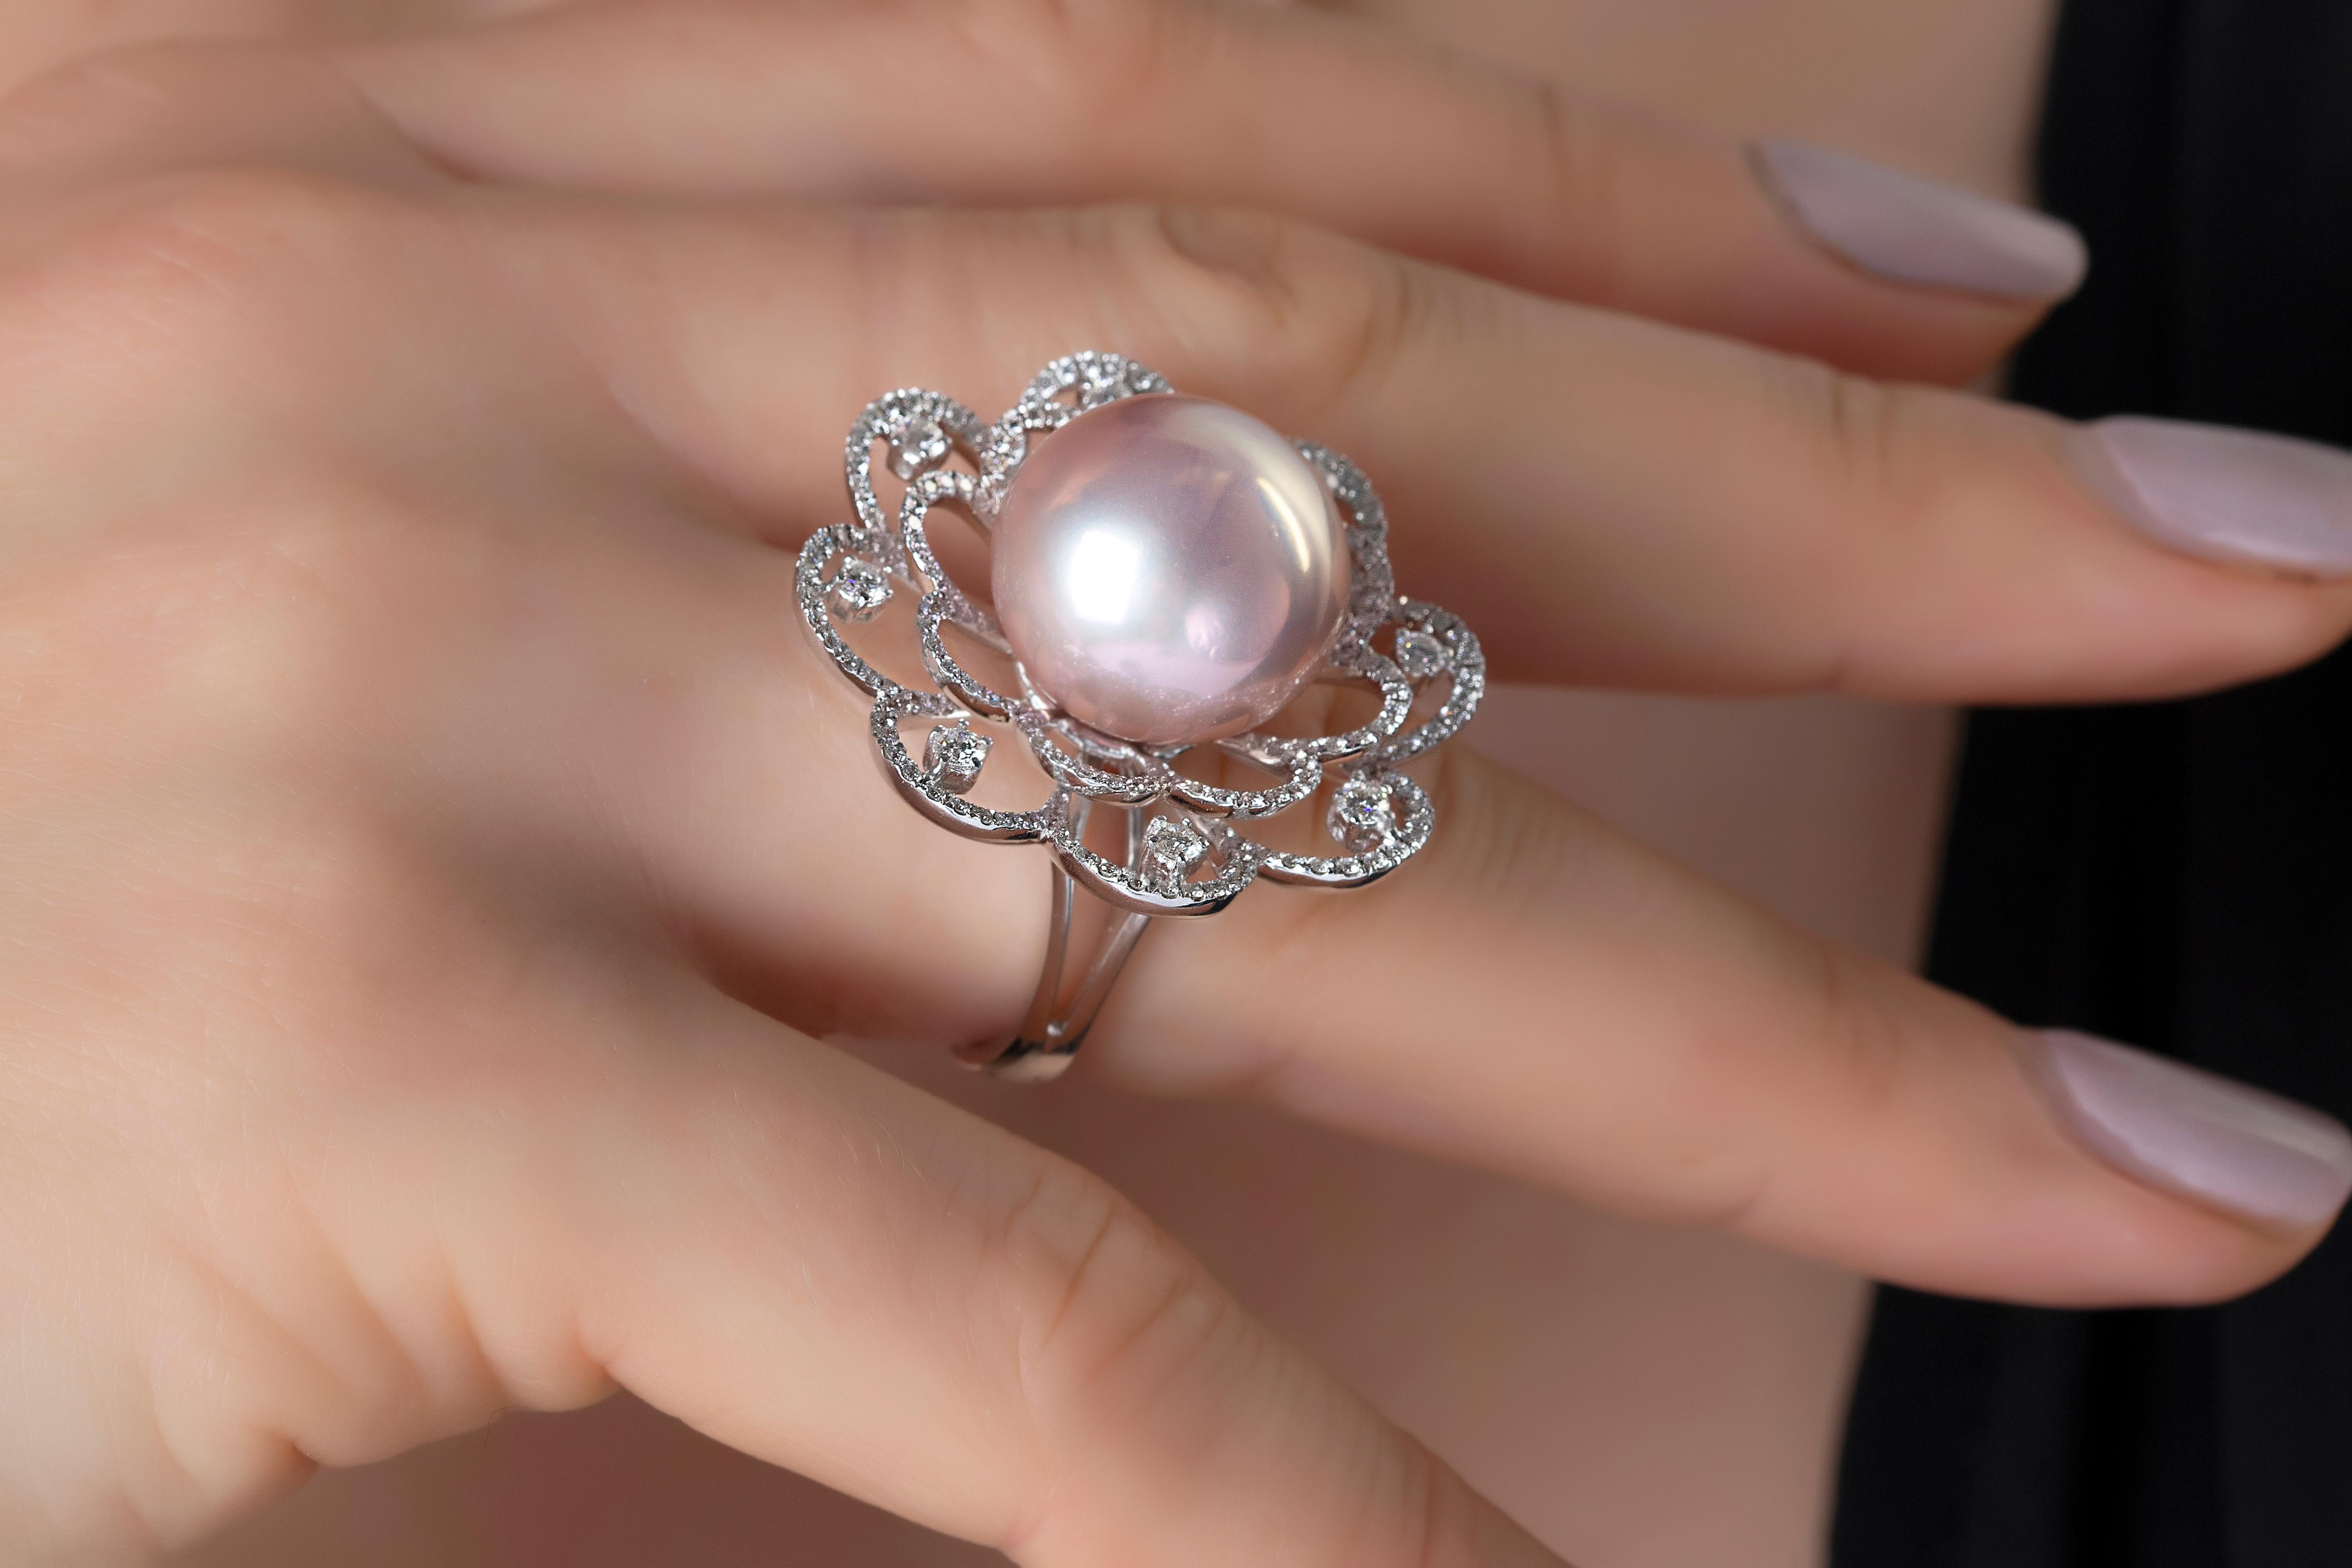 This mesmeric ring by Yoko London features one of their exceptional, natural colour ‘Radiant Orchid’ Freshwater pearls at its centre. The incredibly rare pearl is perfectly accentuated by the diamond floral motif which surrounds it. Bold, yet